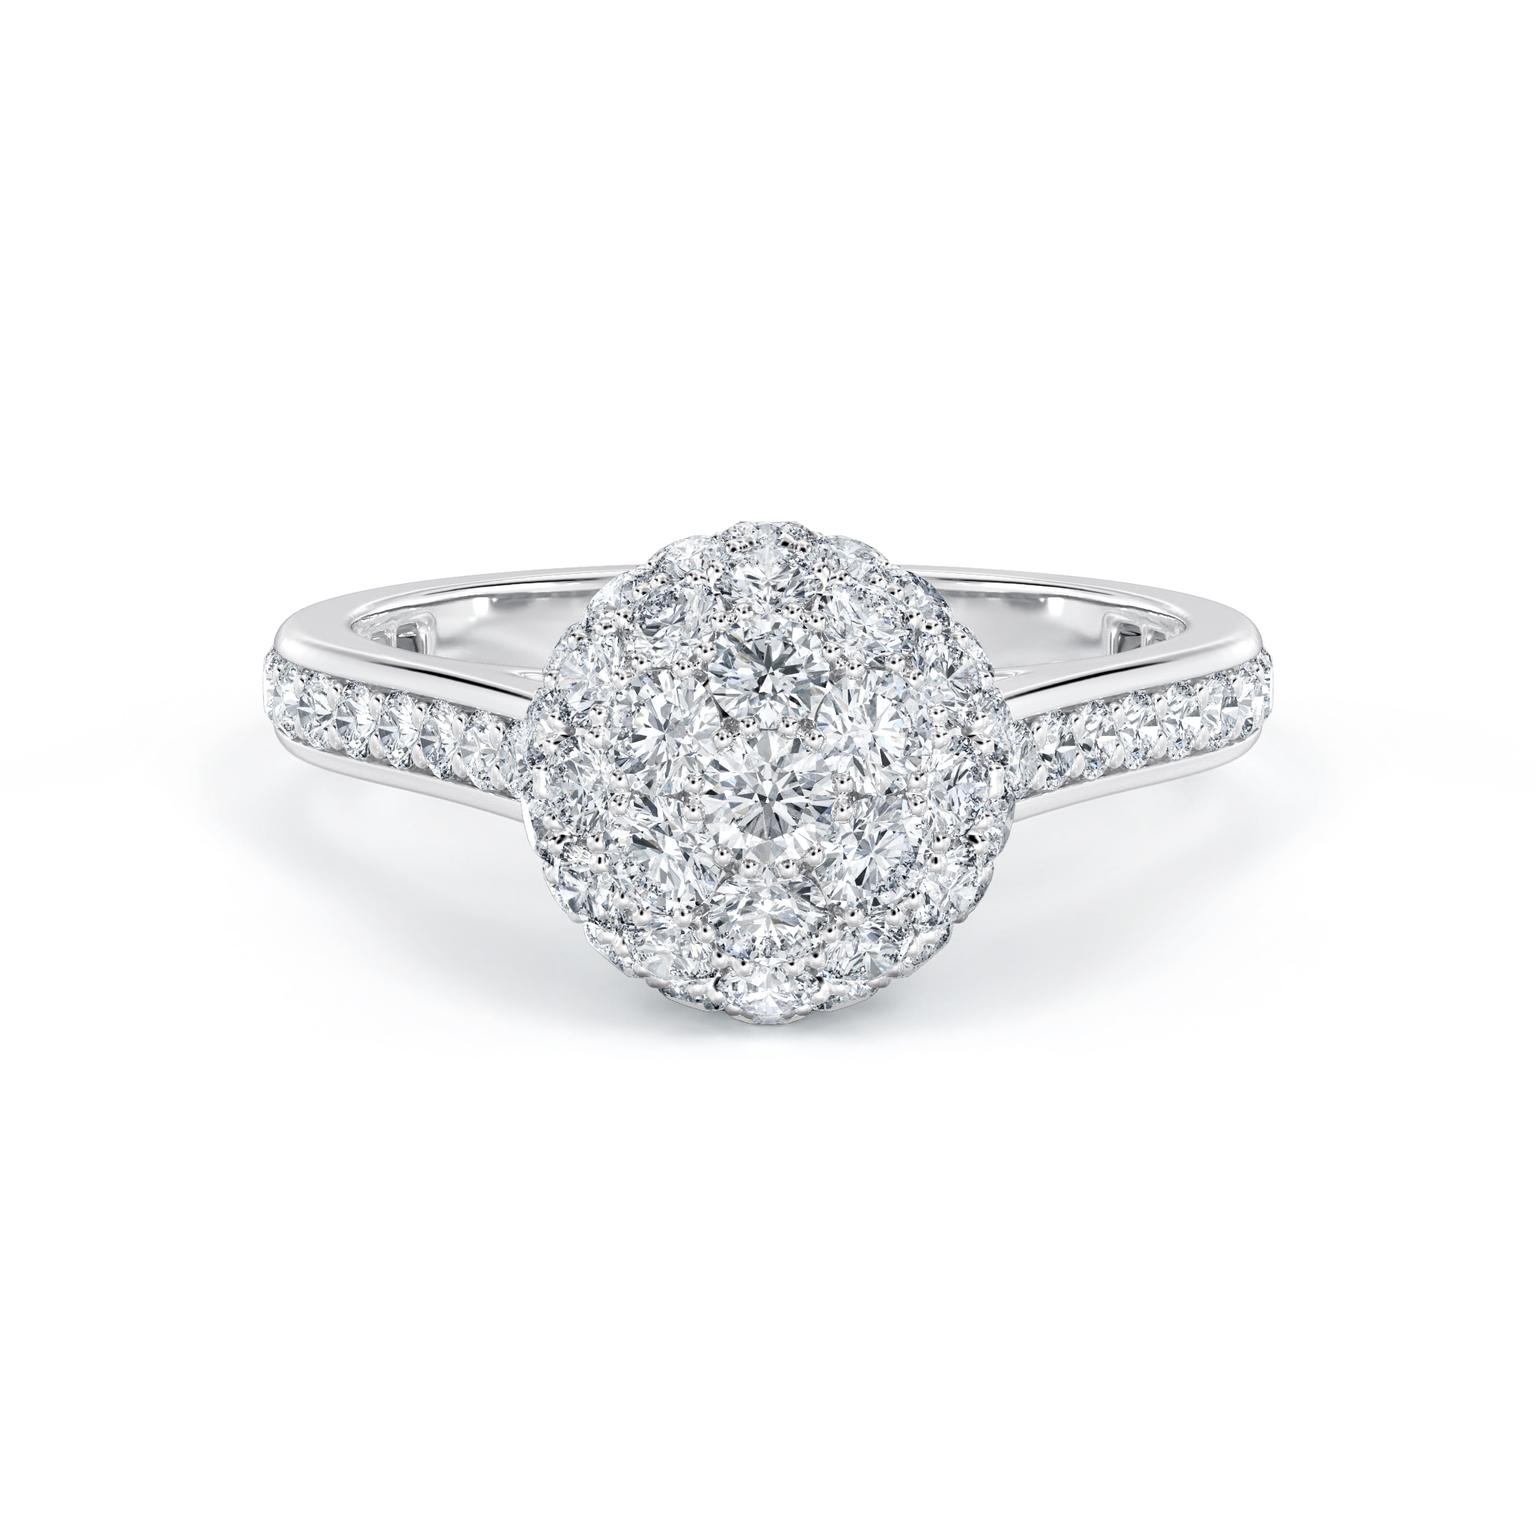 Prelude jacket ring solitaire by De Beers - Diamond ring pavé only